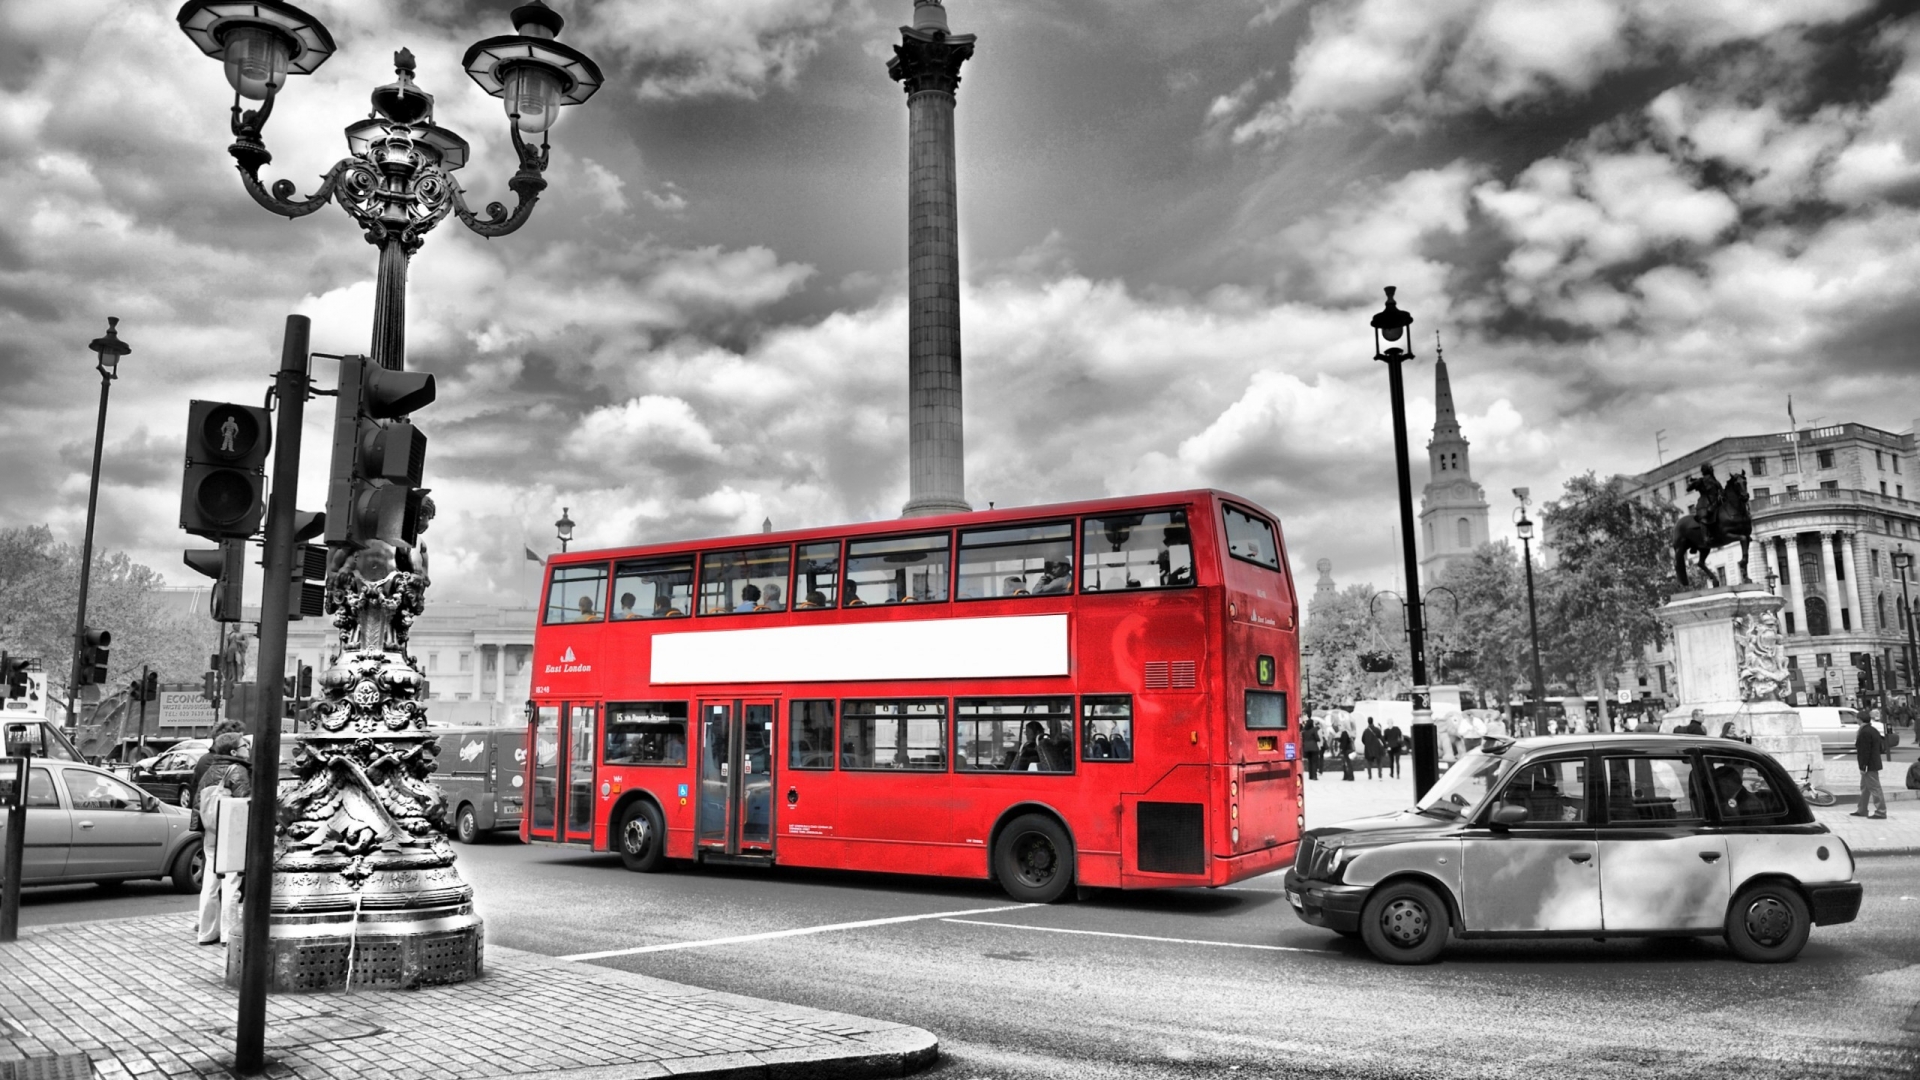 Black And White London For 1920 X 1080 Hdtv 1080p Resolution - City Road Blur Background - HD Wallpaper 